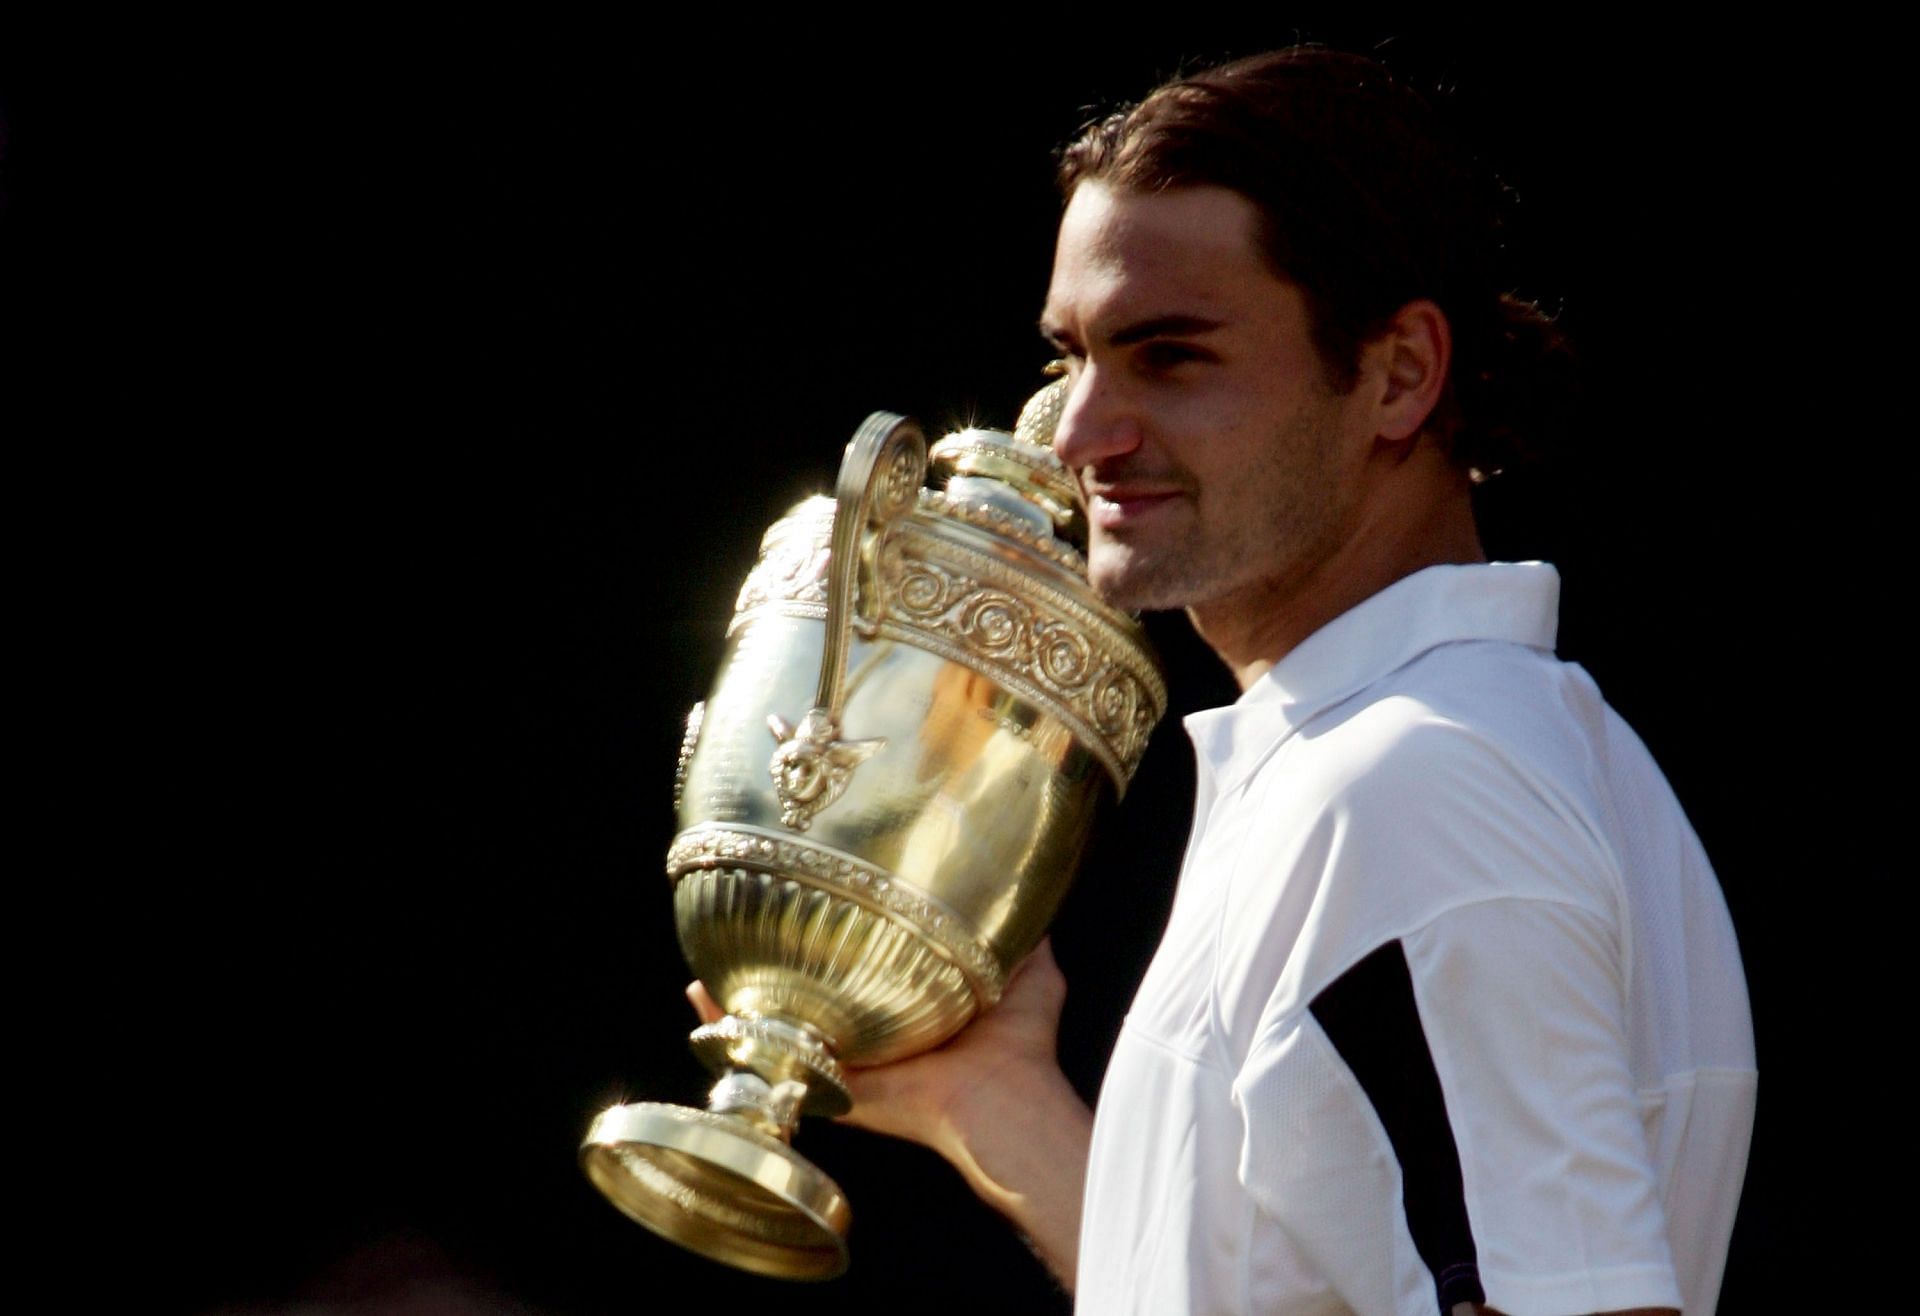 Roger Federer after winning the Wimbledon Championship in 2004